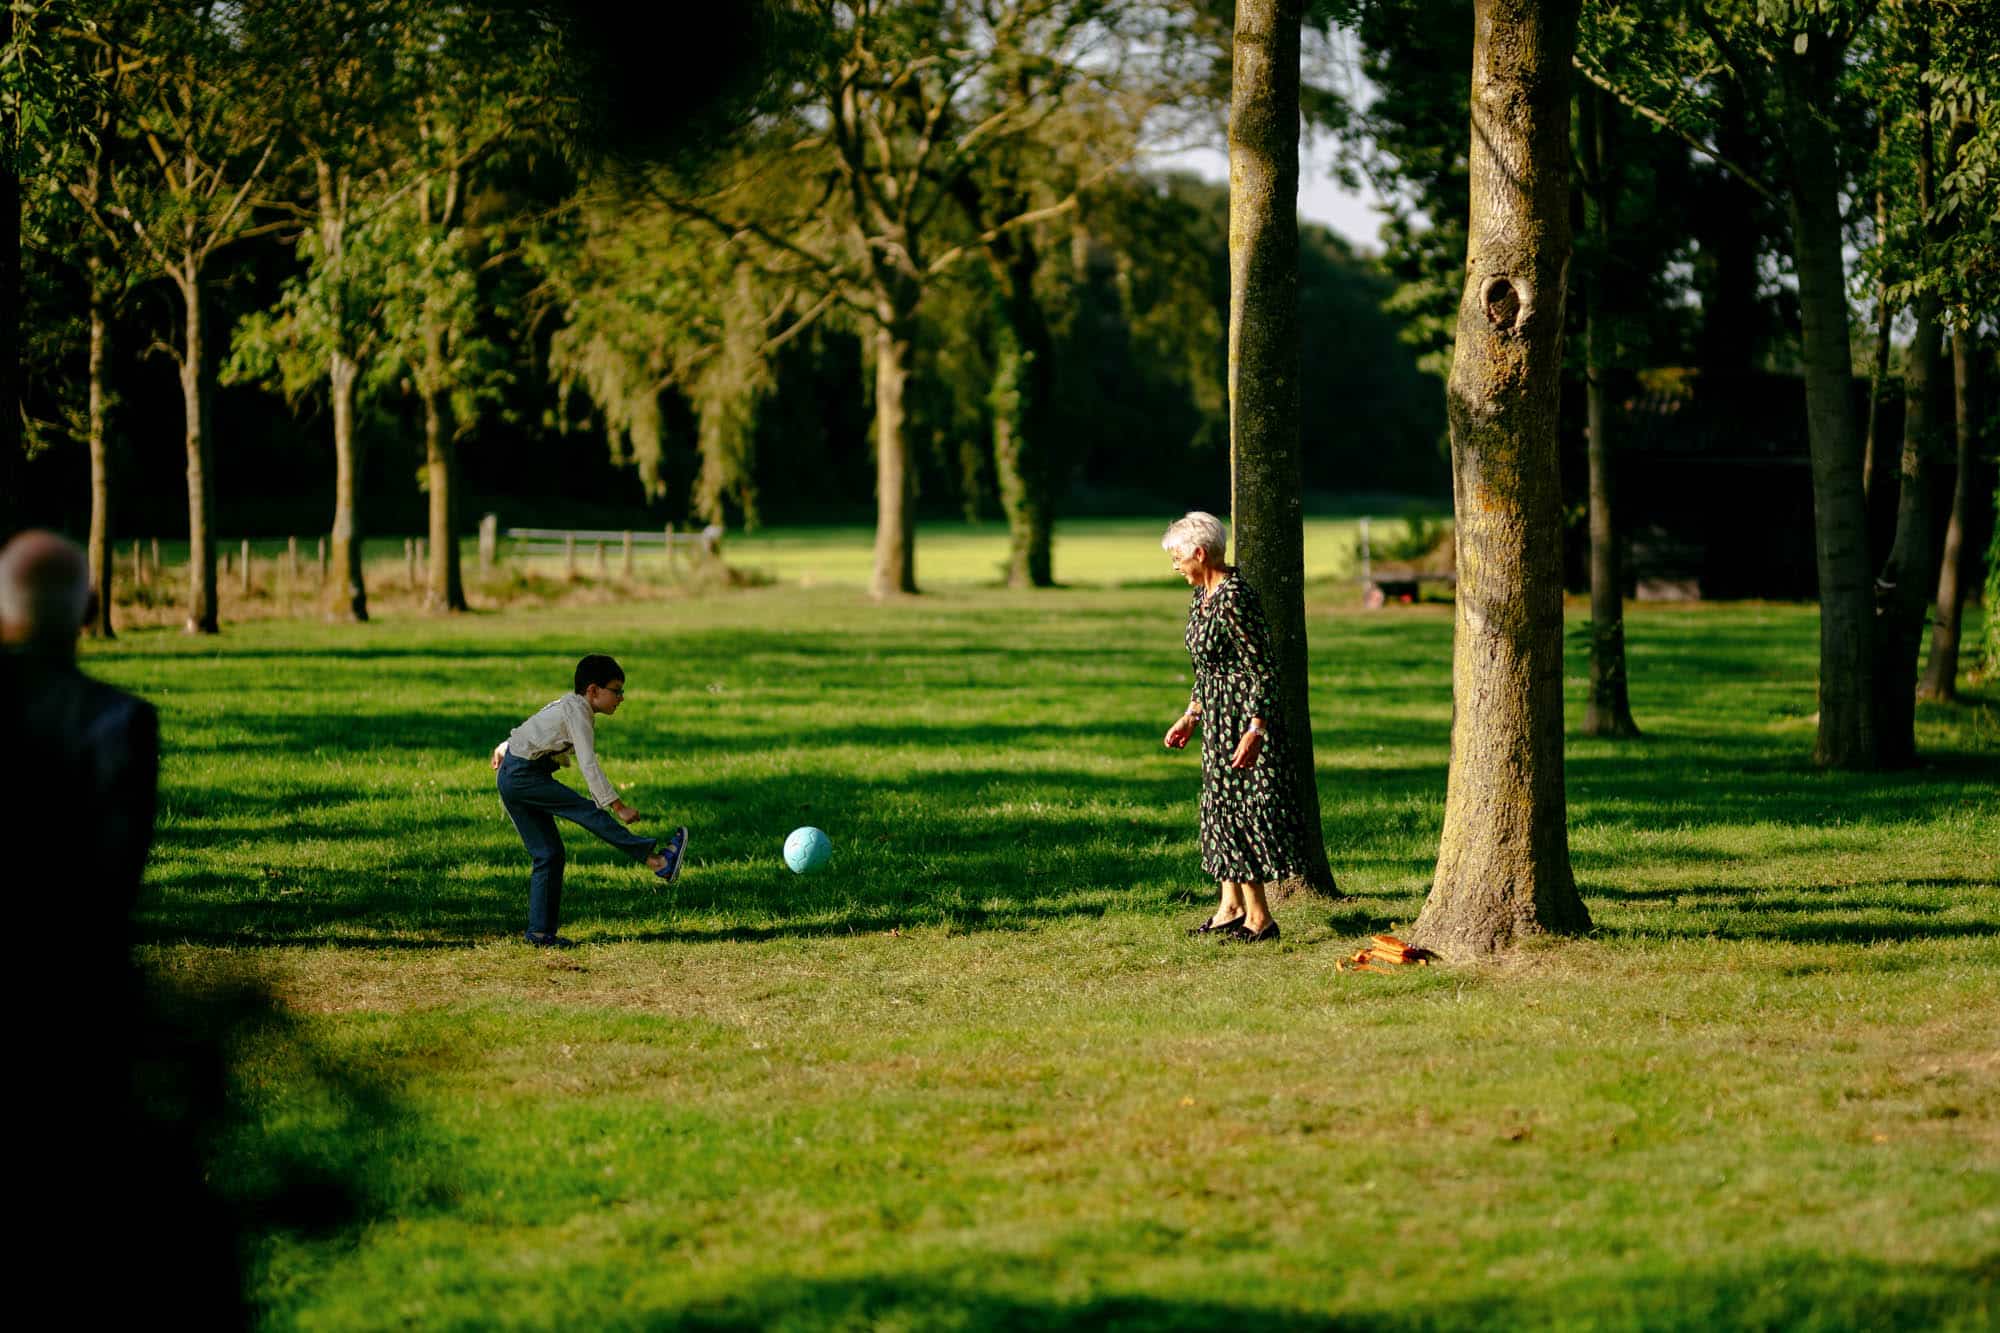     Description: A woman plays a game with a ball in a park.